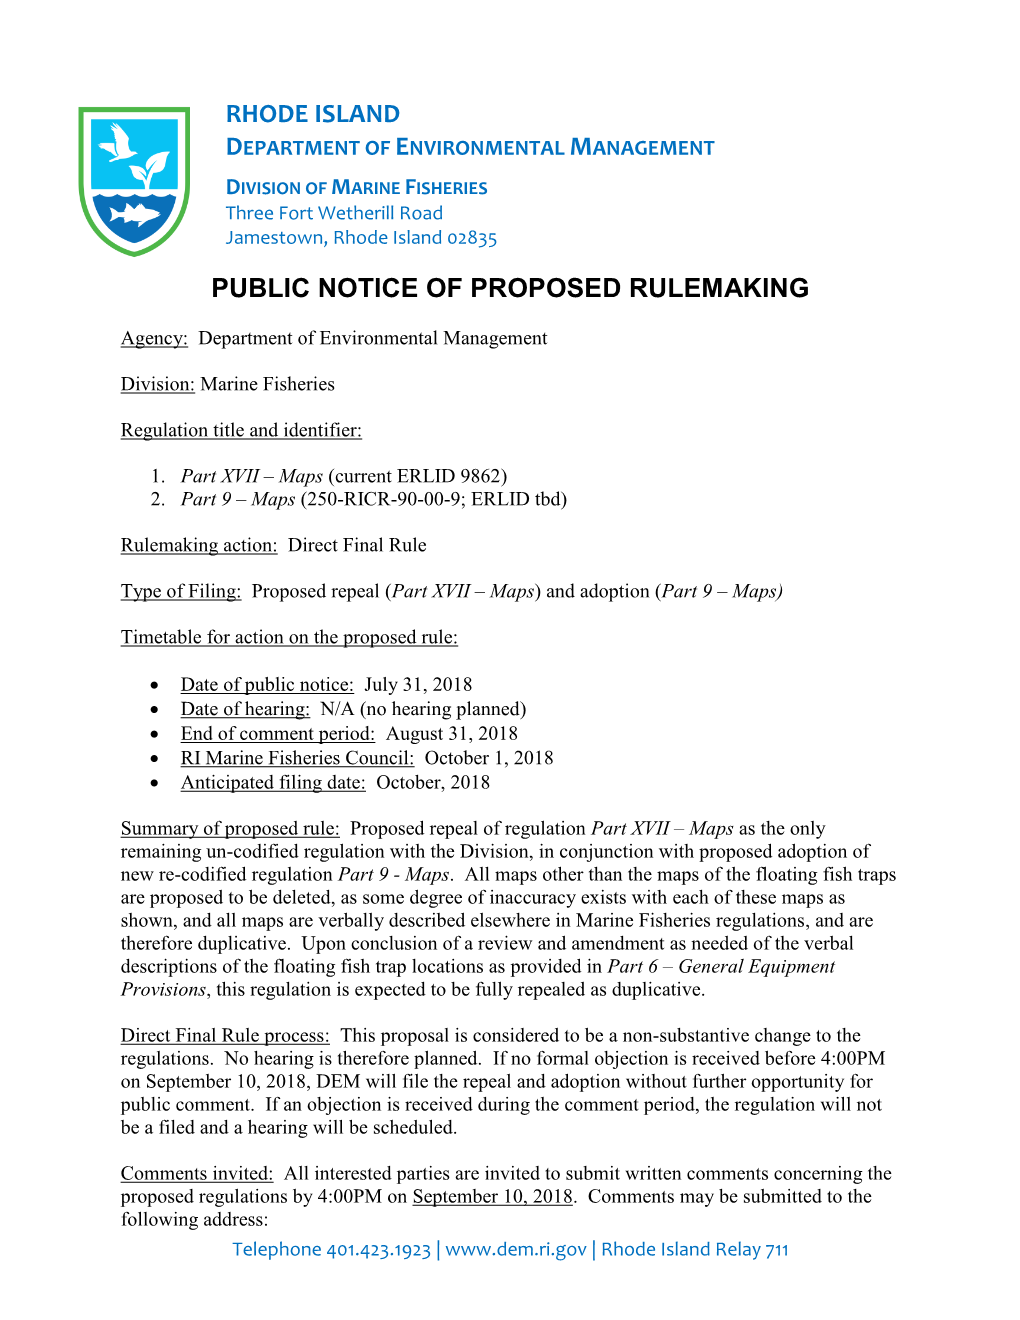 Rhode Island Public Notice of Proposed Rulemaking